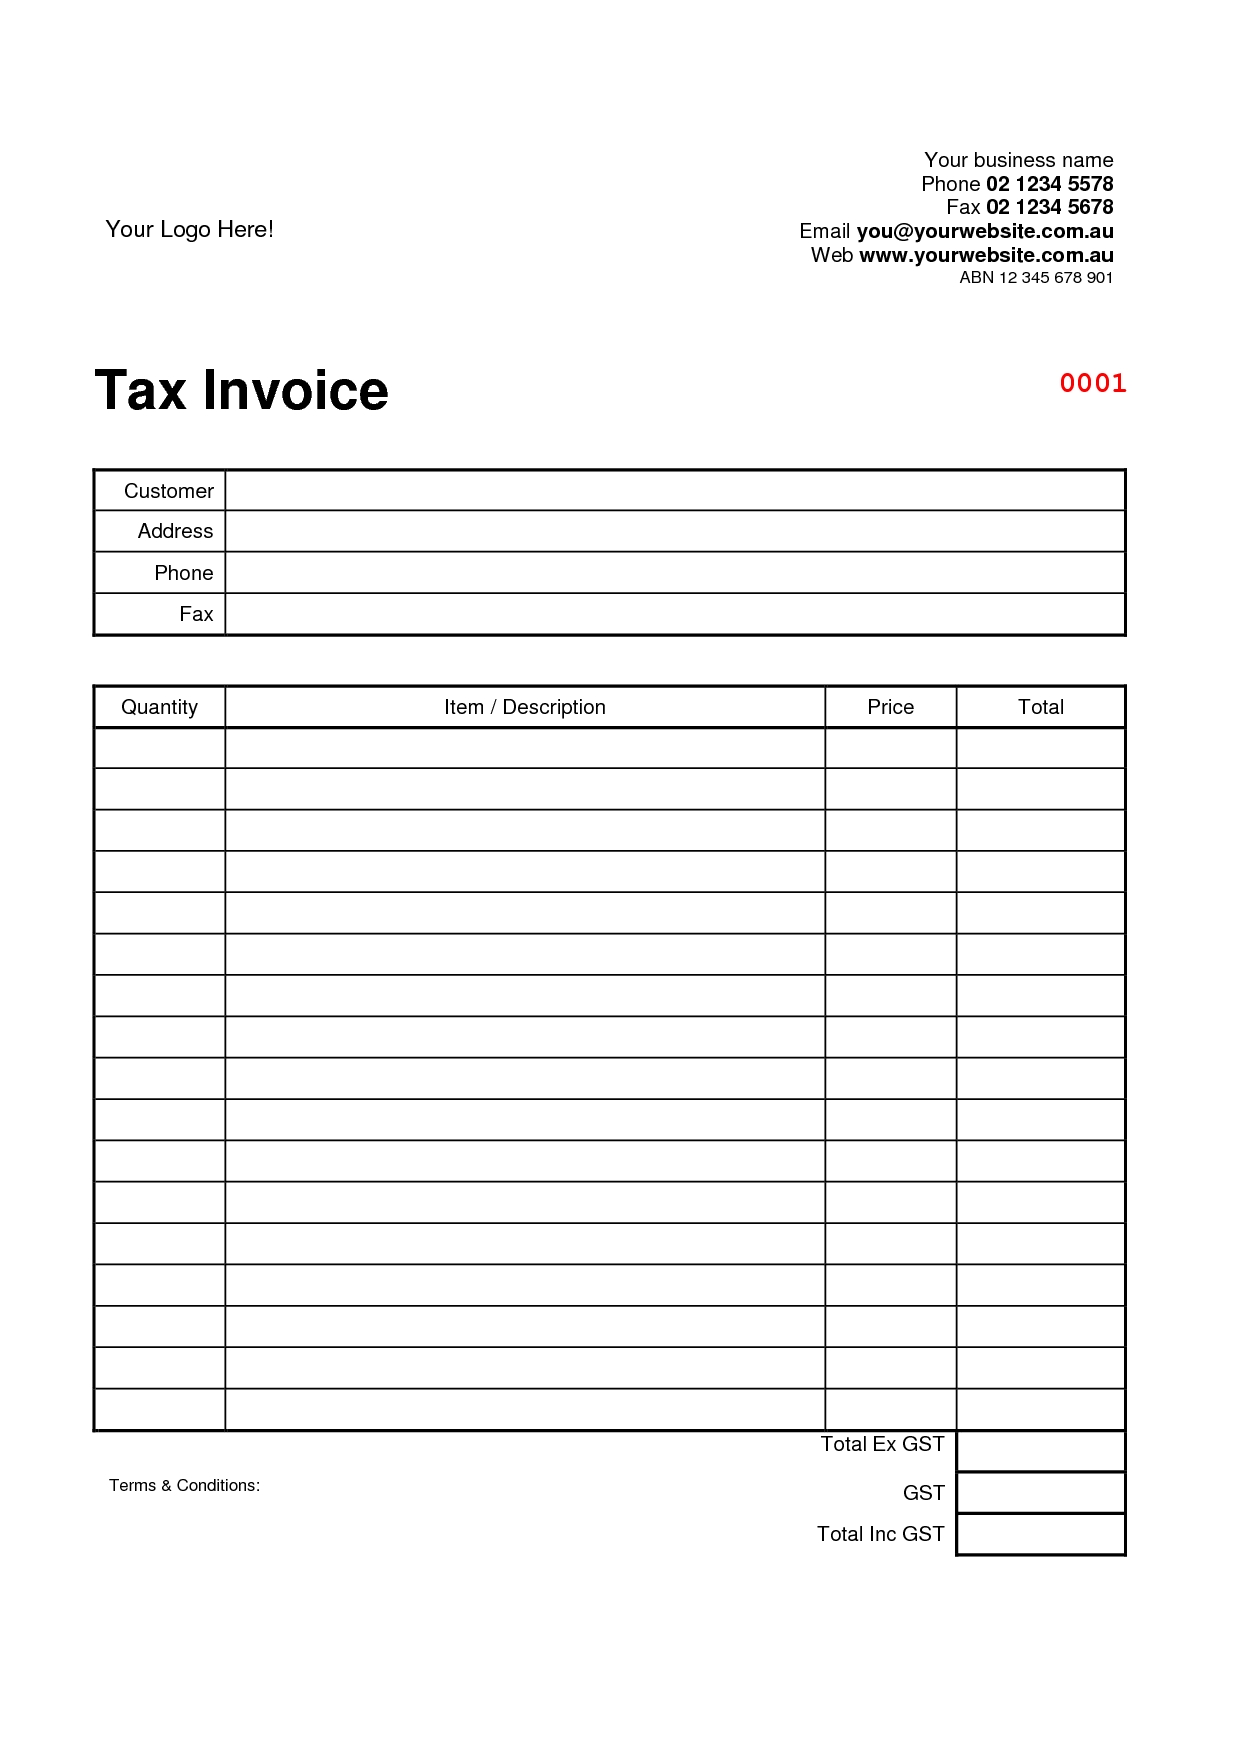 creating an invoice in excel